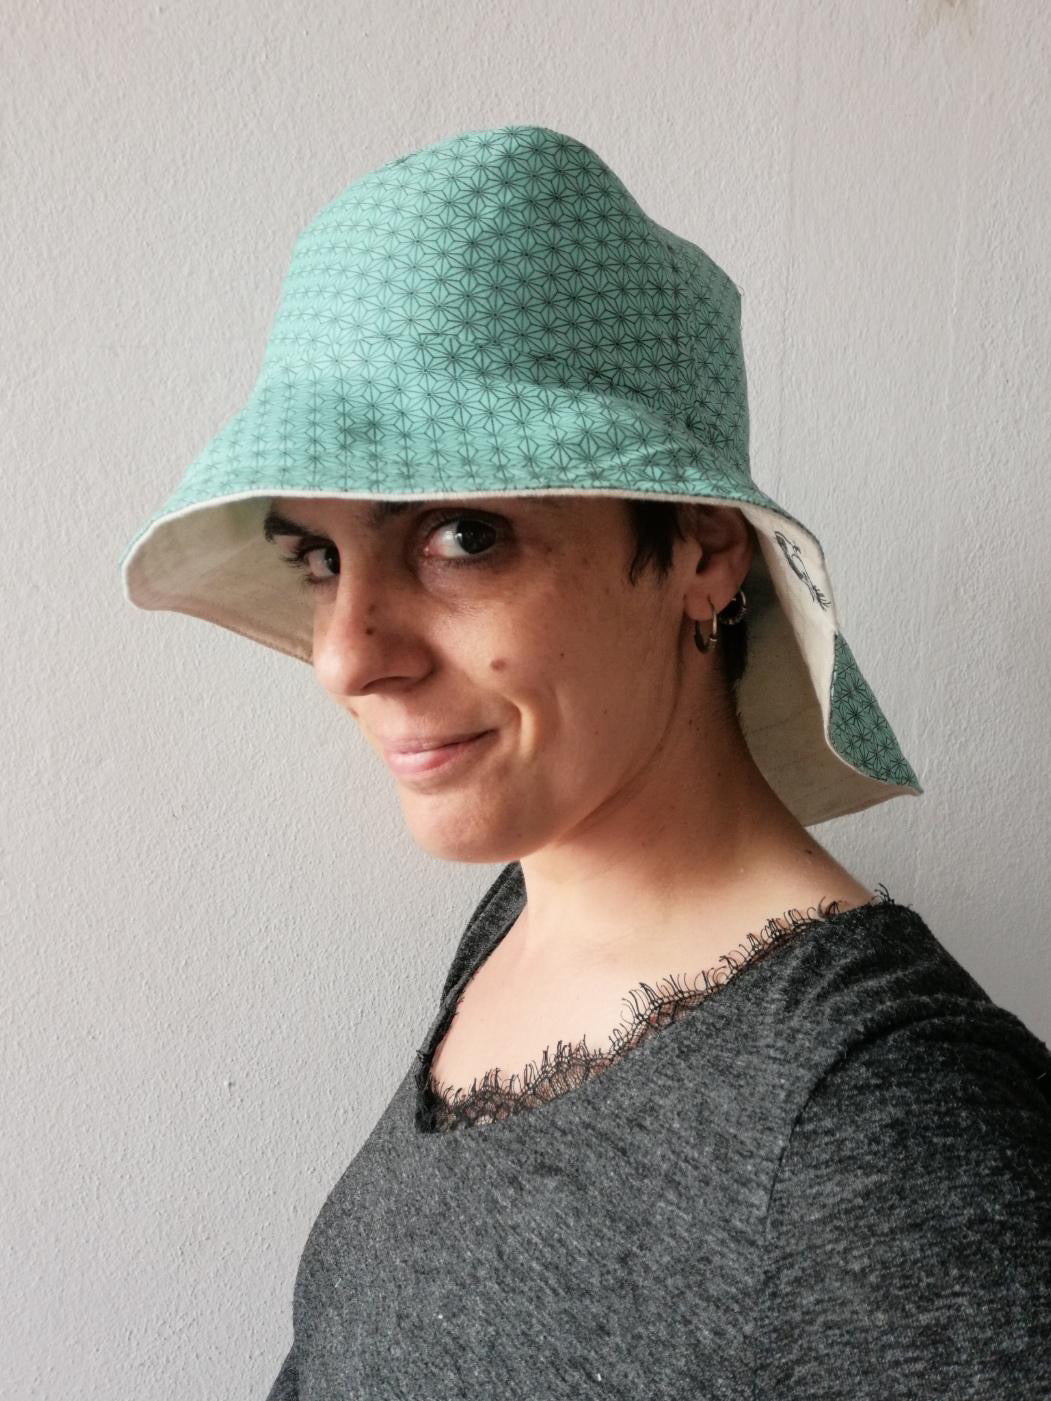 "Upcycled Reversible Bucket Hat" Sewing Workshop with Iva in Porto, Portugal by subcultours